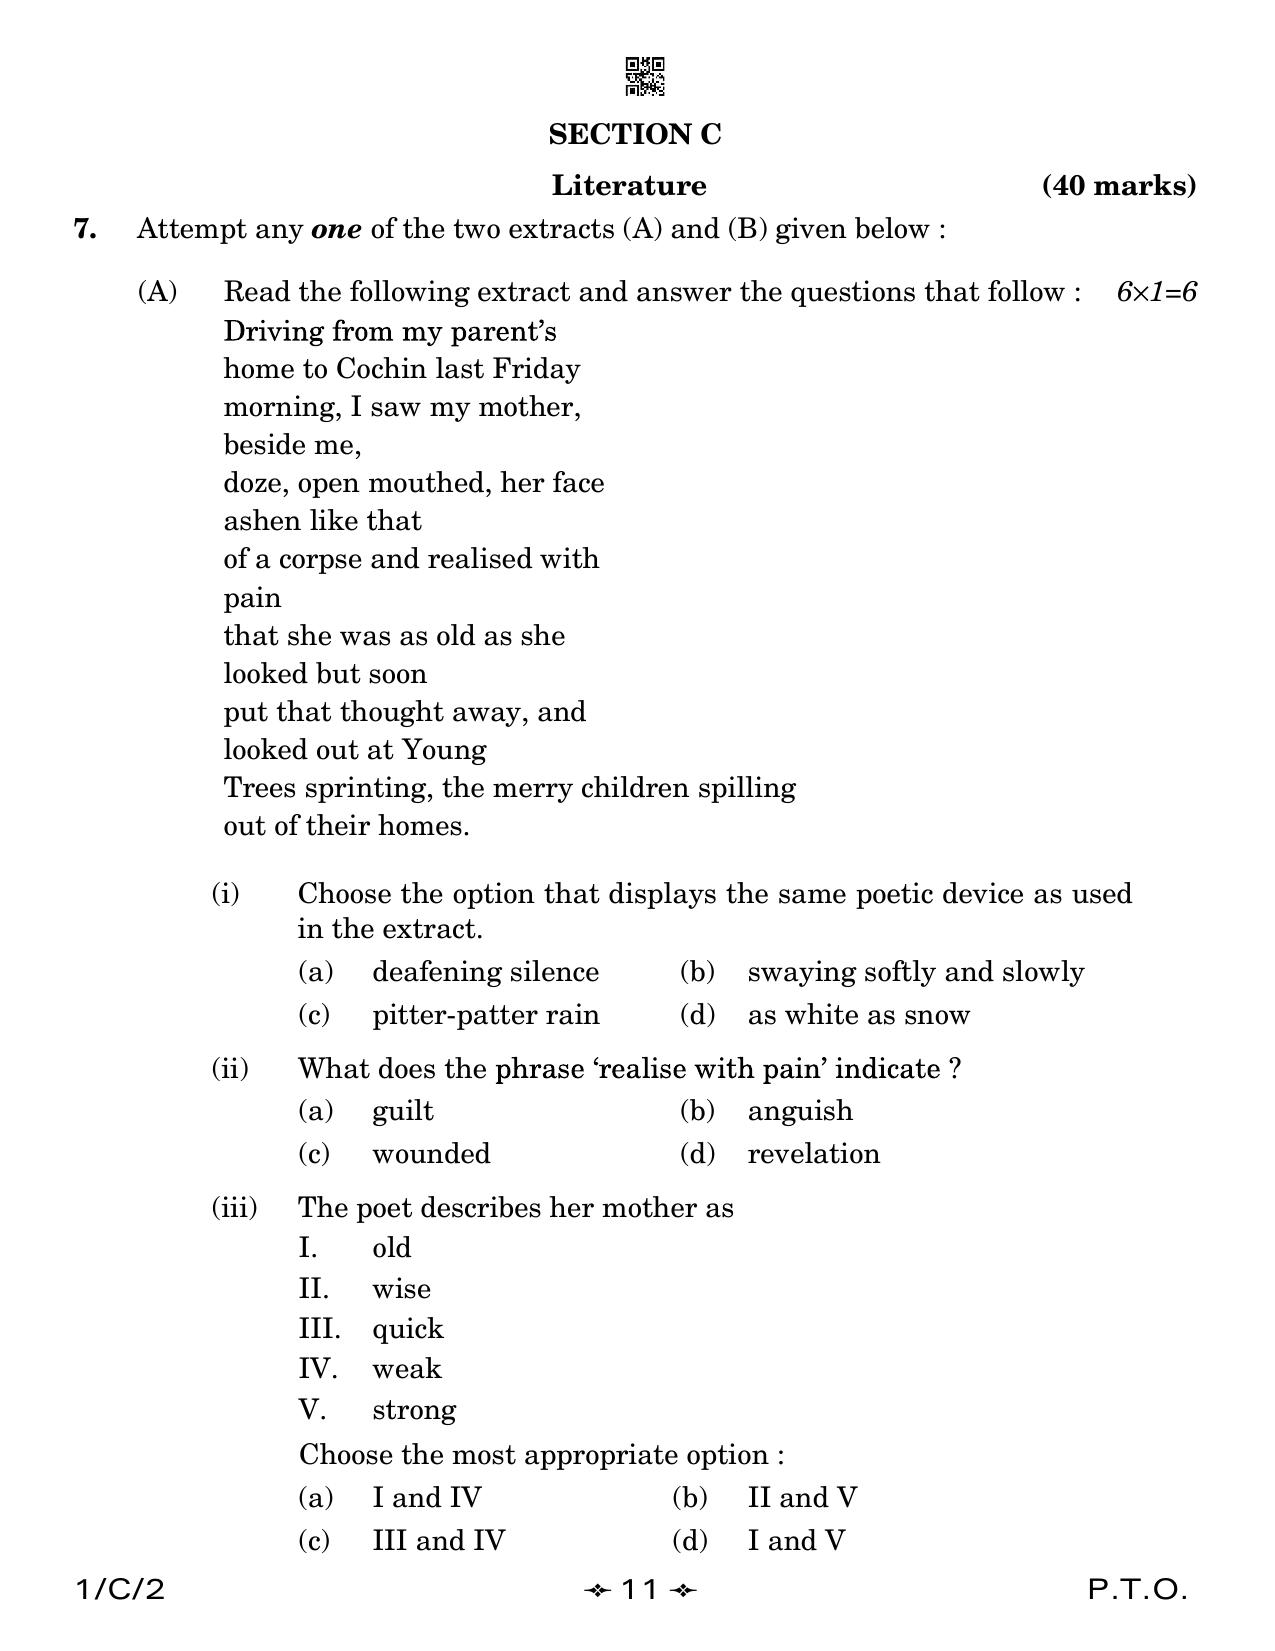 CBSE Class 12 1-2 English Core 2023 (Compartment) Question Paper - Page 11